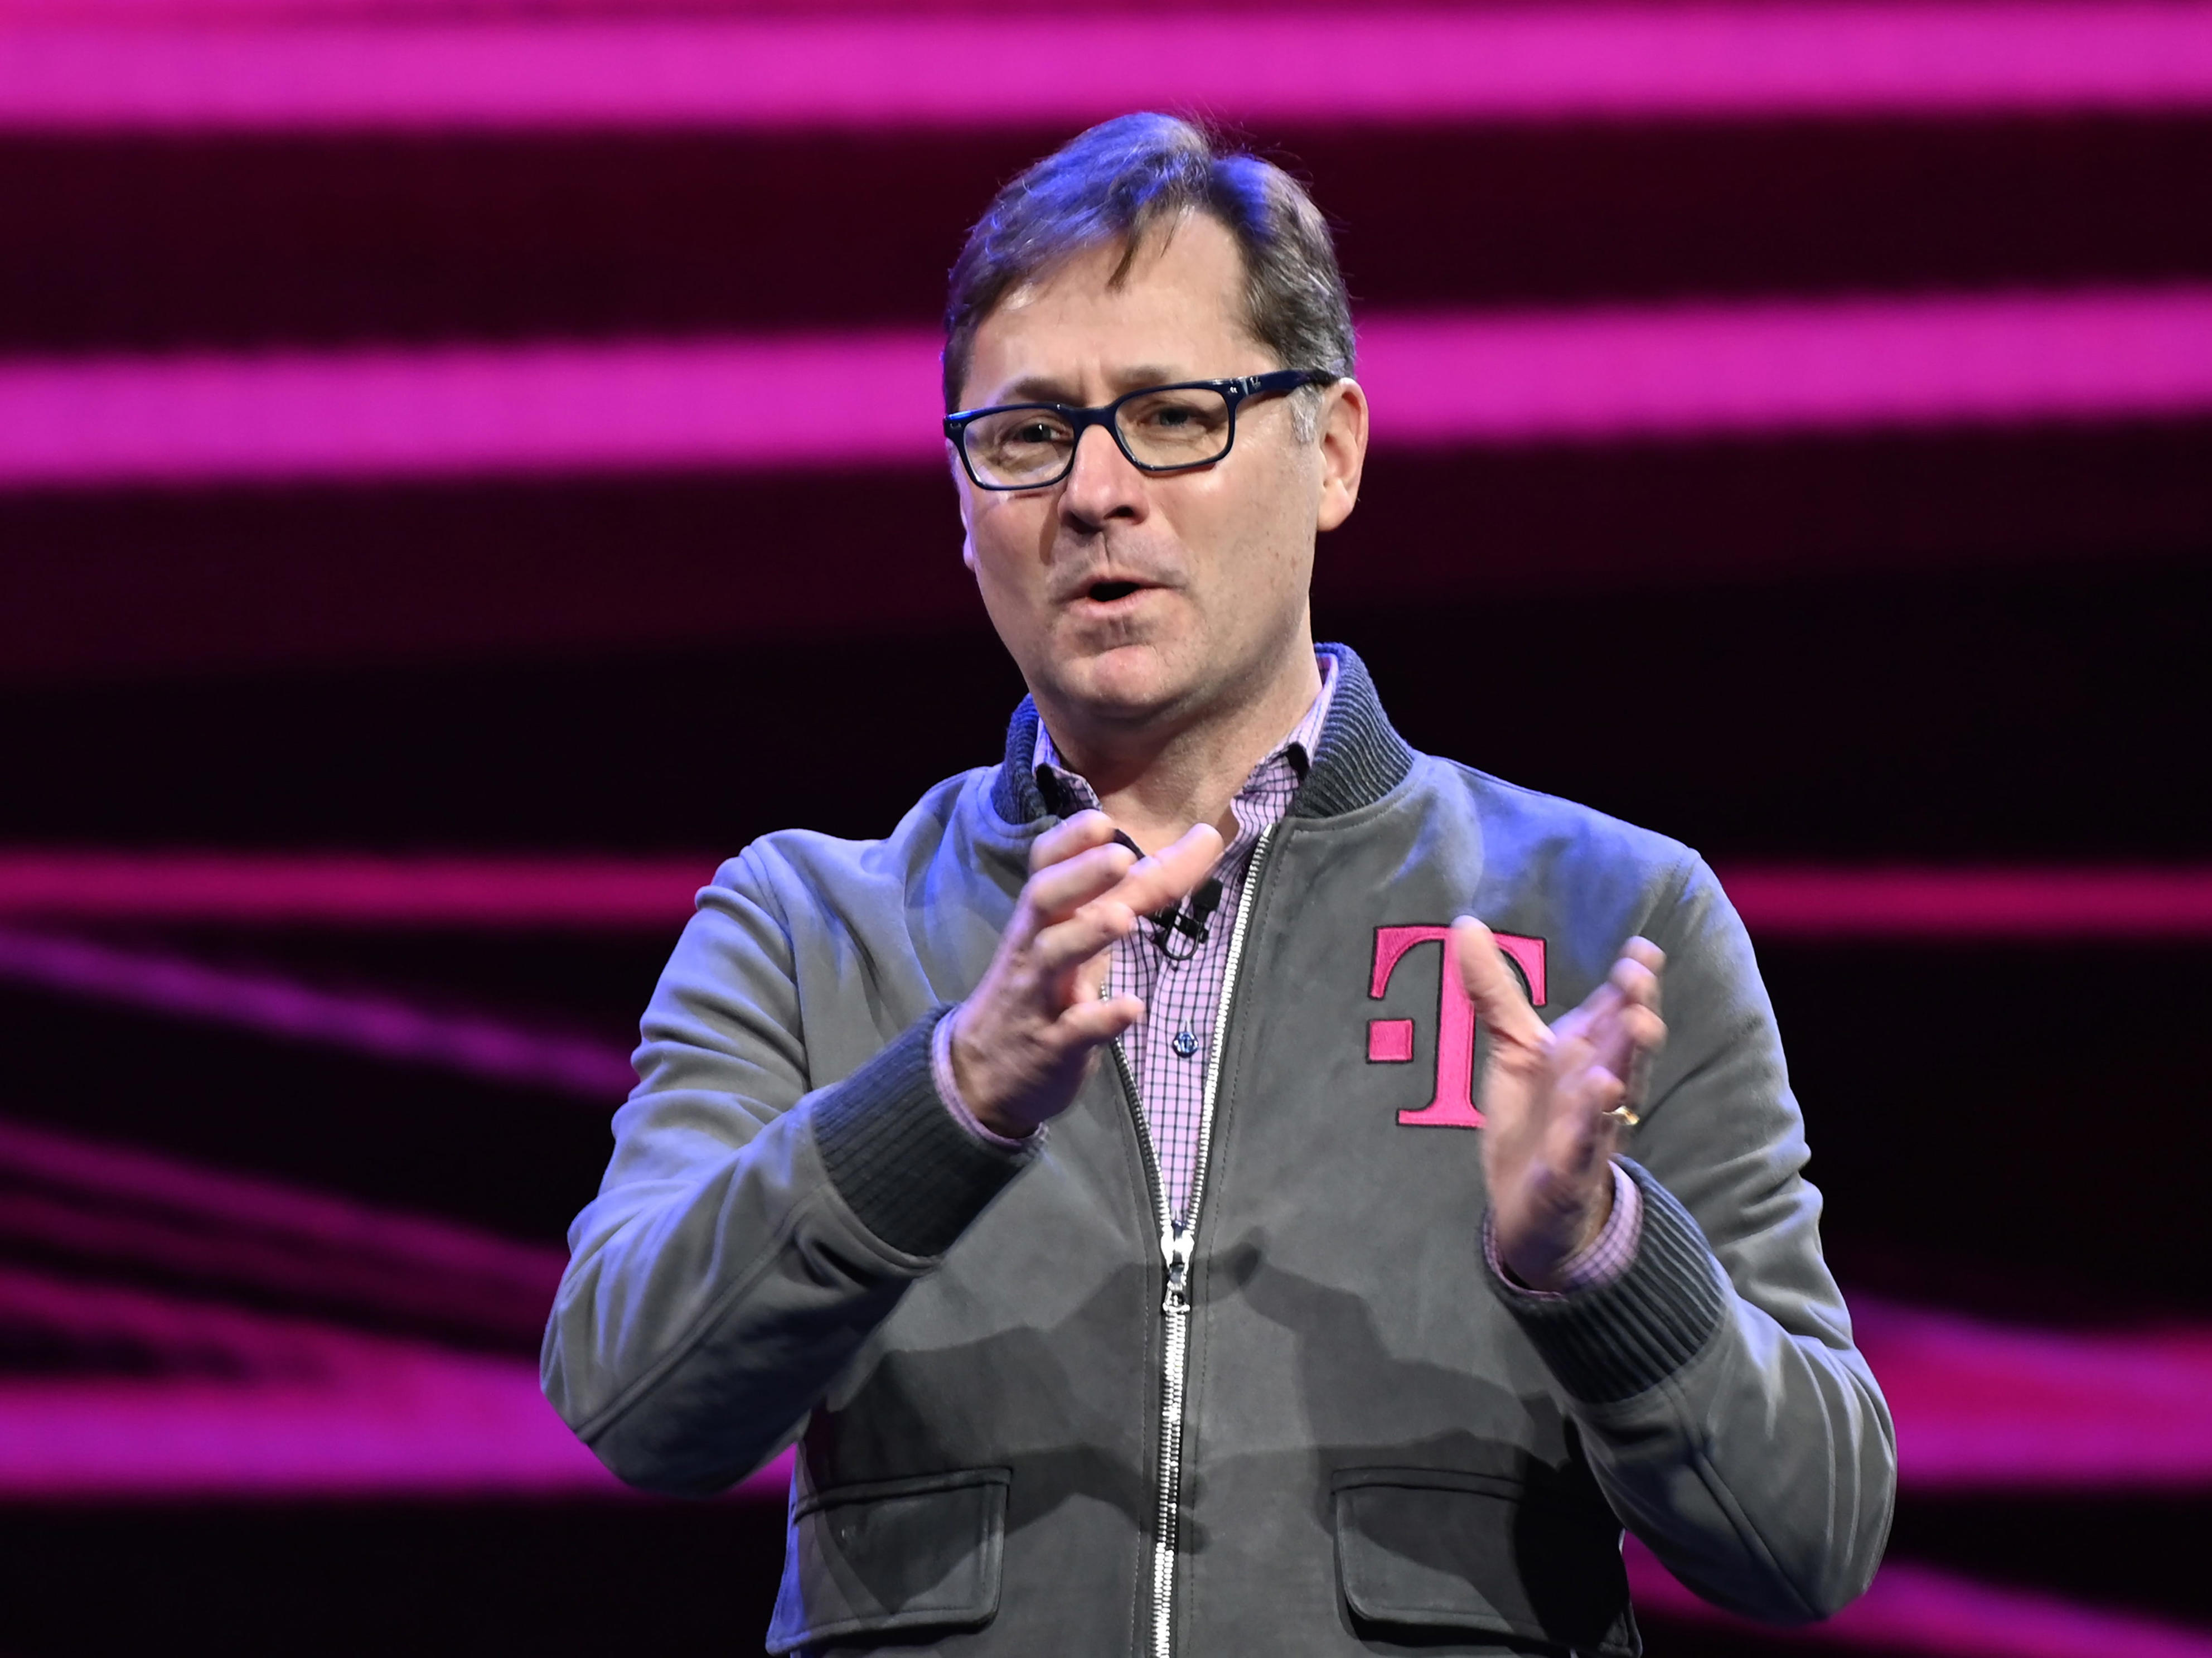 <p>The mobile carrier is laying off just under 7% of its total employees in wave of cuts that are expected to be made by September.</p><p>In his letter, Sievert cited T-Mobile's efforts to compete with rivals in attracting new customers. Its most recent quarterly earnings report revealed that sales were down 2.5% year-over-year and net customer additions fell.</p><p>"What it takes to attract and retain customers is materially more expensive than it was just a few quarters ago," Sievert said in the letter. "This is a company and team that looks around corners, that anticipates change and stays ahead of it."</p><p>Sievert added that affected employess can expect to receive "competitive severance packages," career transition services, and more.</p>